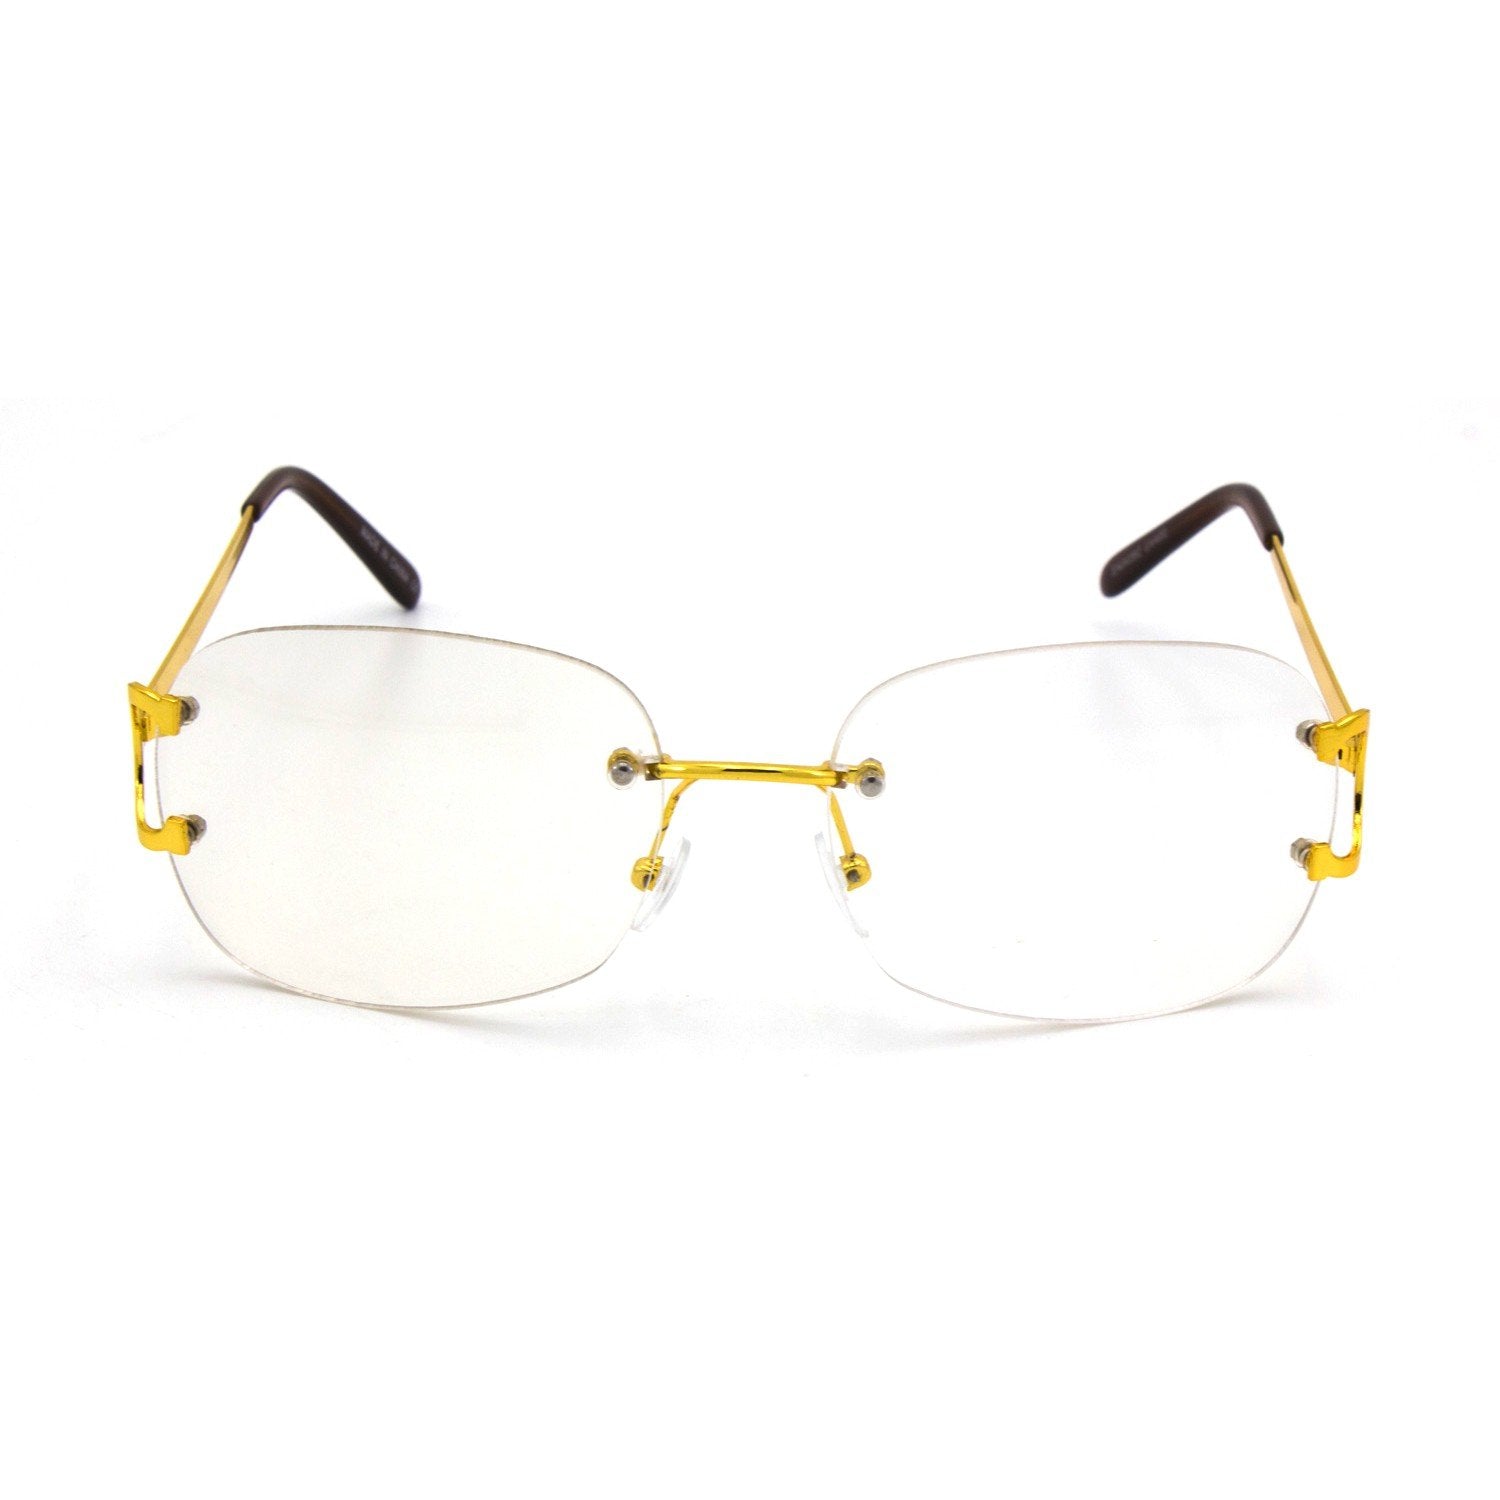 "Mansions" Rimless Clear Frames - Weekend Shade Sunglasses